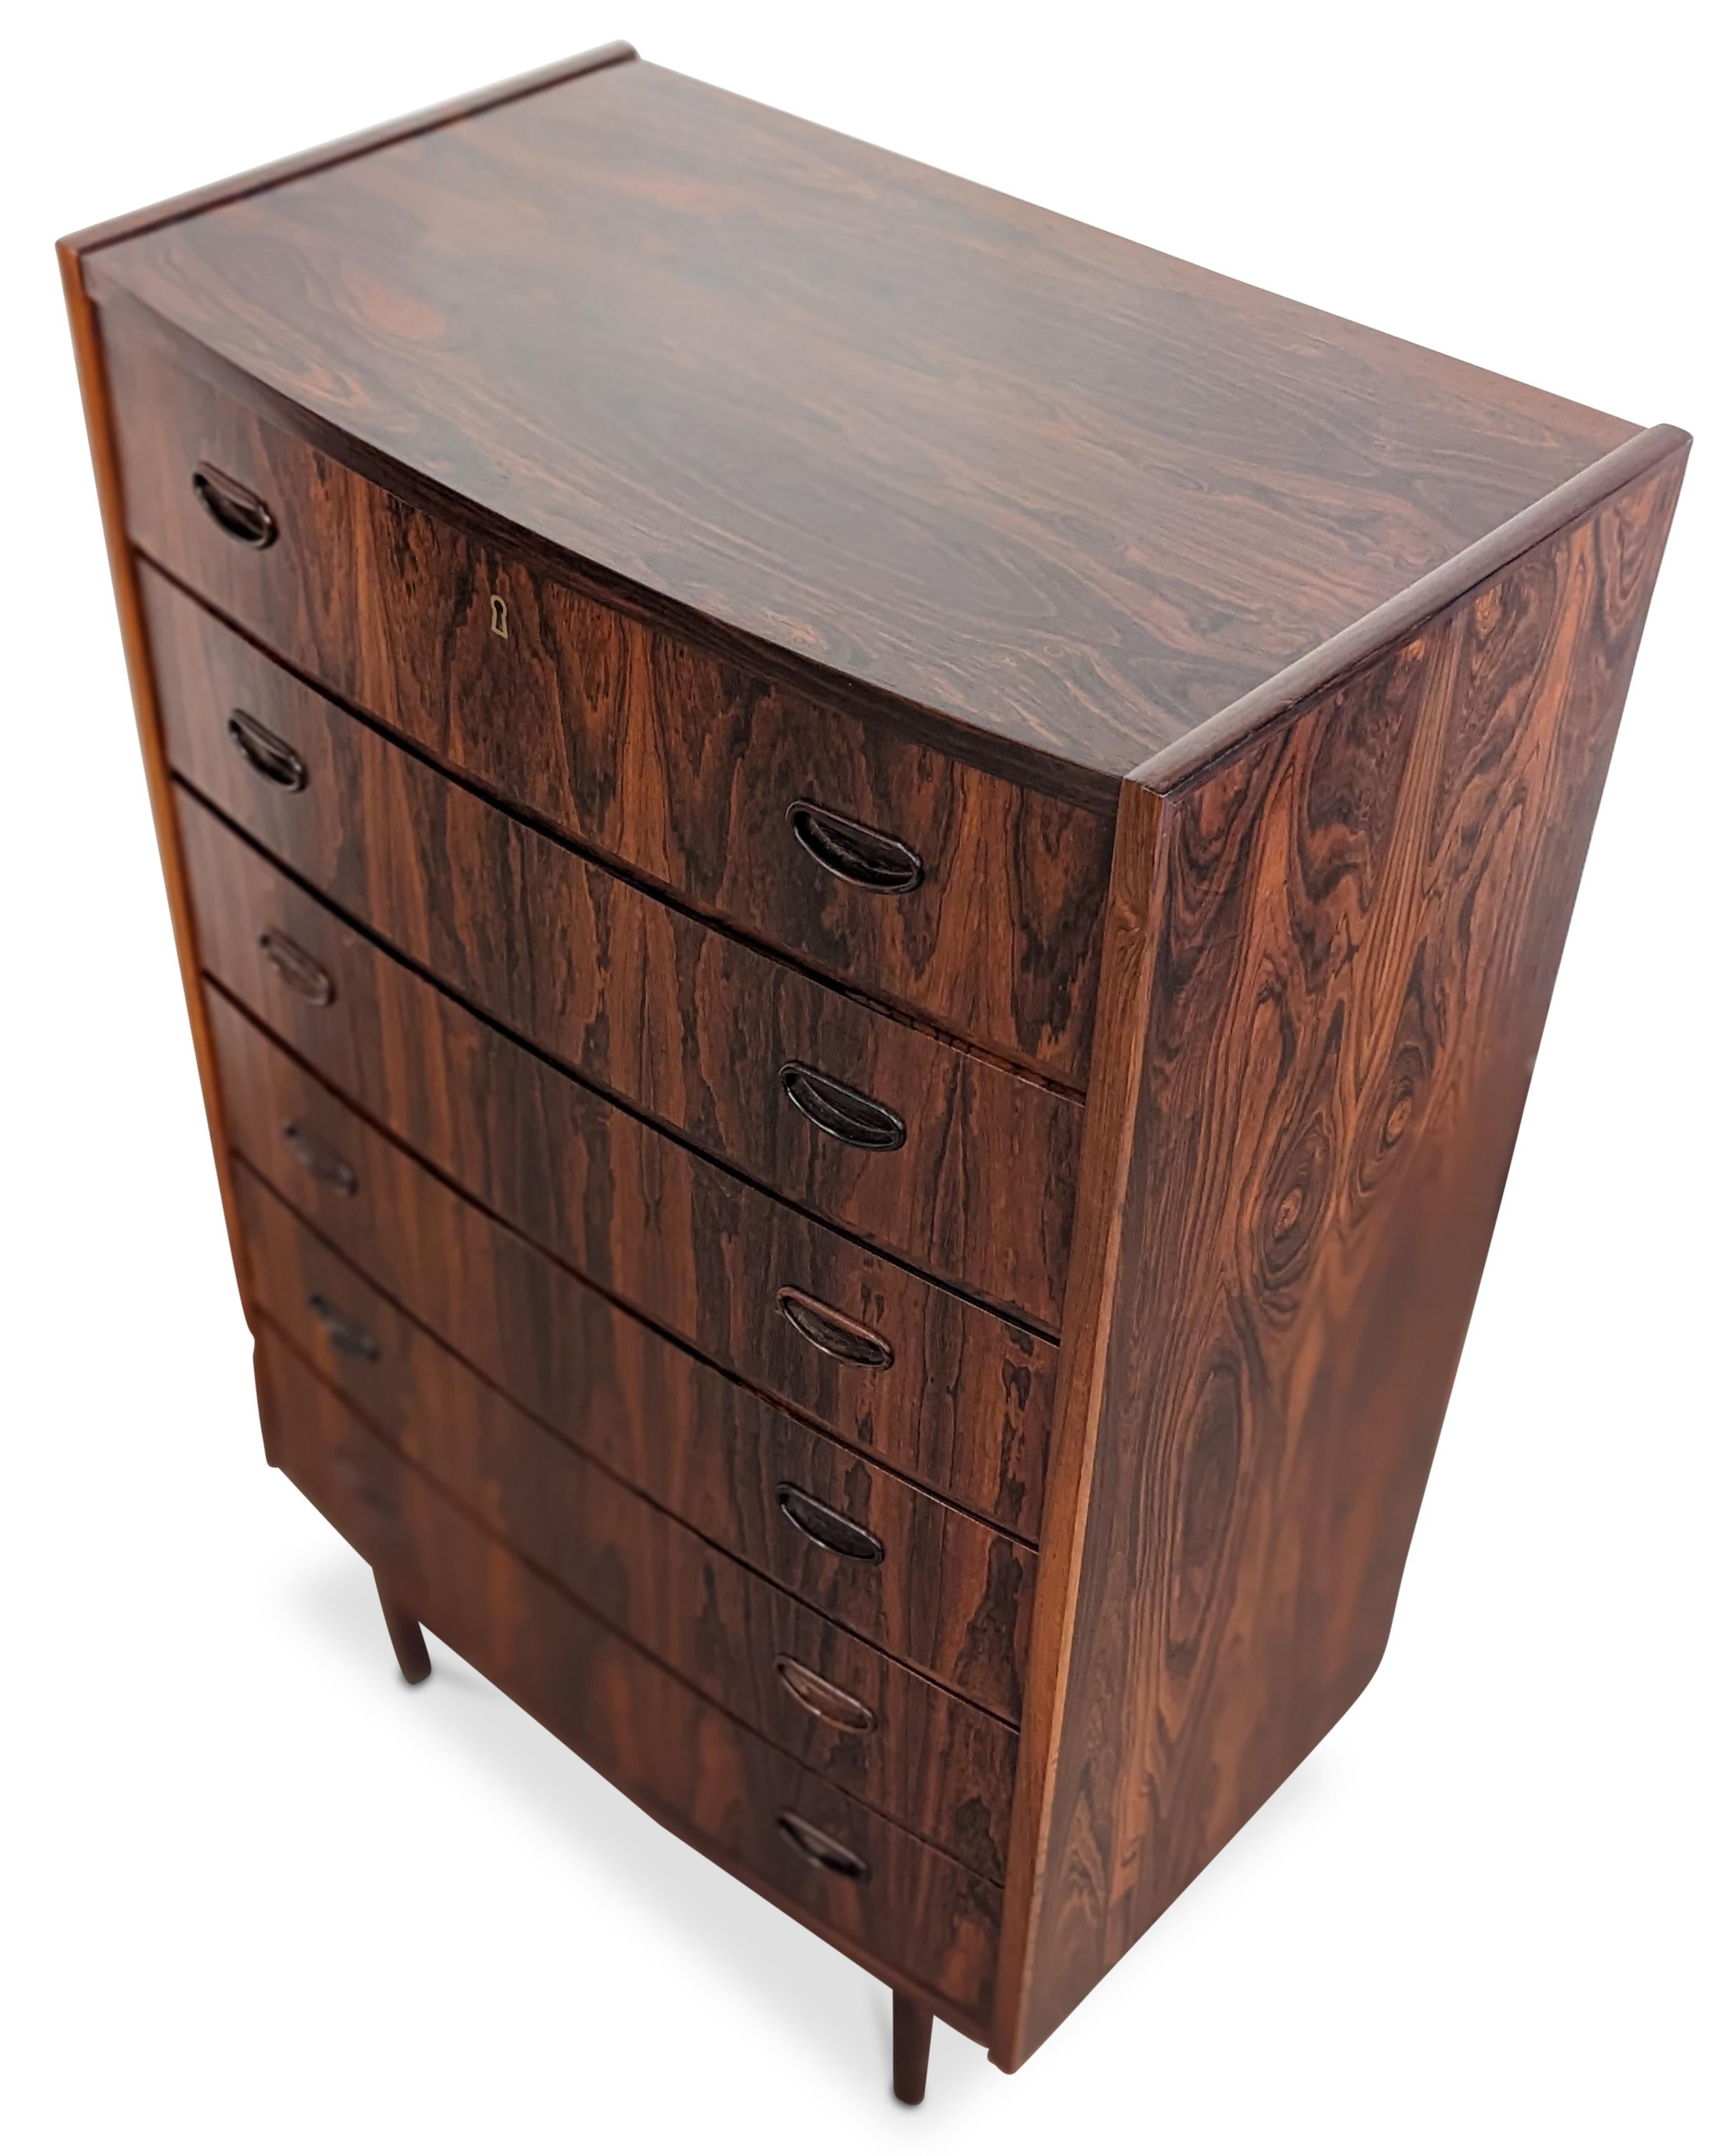 Vintage Danish Mid-Century Modern, made in the 1950s - Recently refurbished

The piece is more than 65+ years old and some wear and tear can be expected, but we do everything we can to refurbish them in respect to the design.

Brazilian rosewood